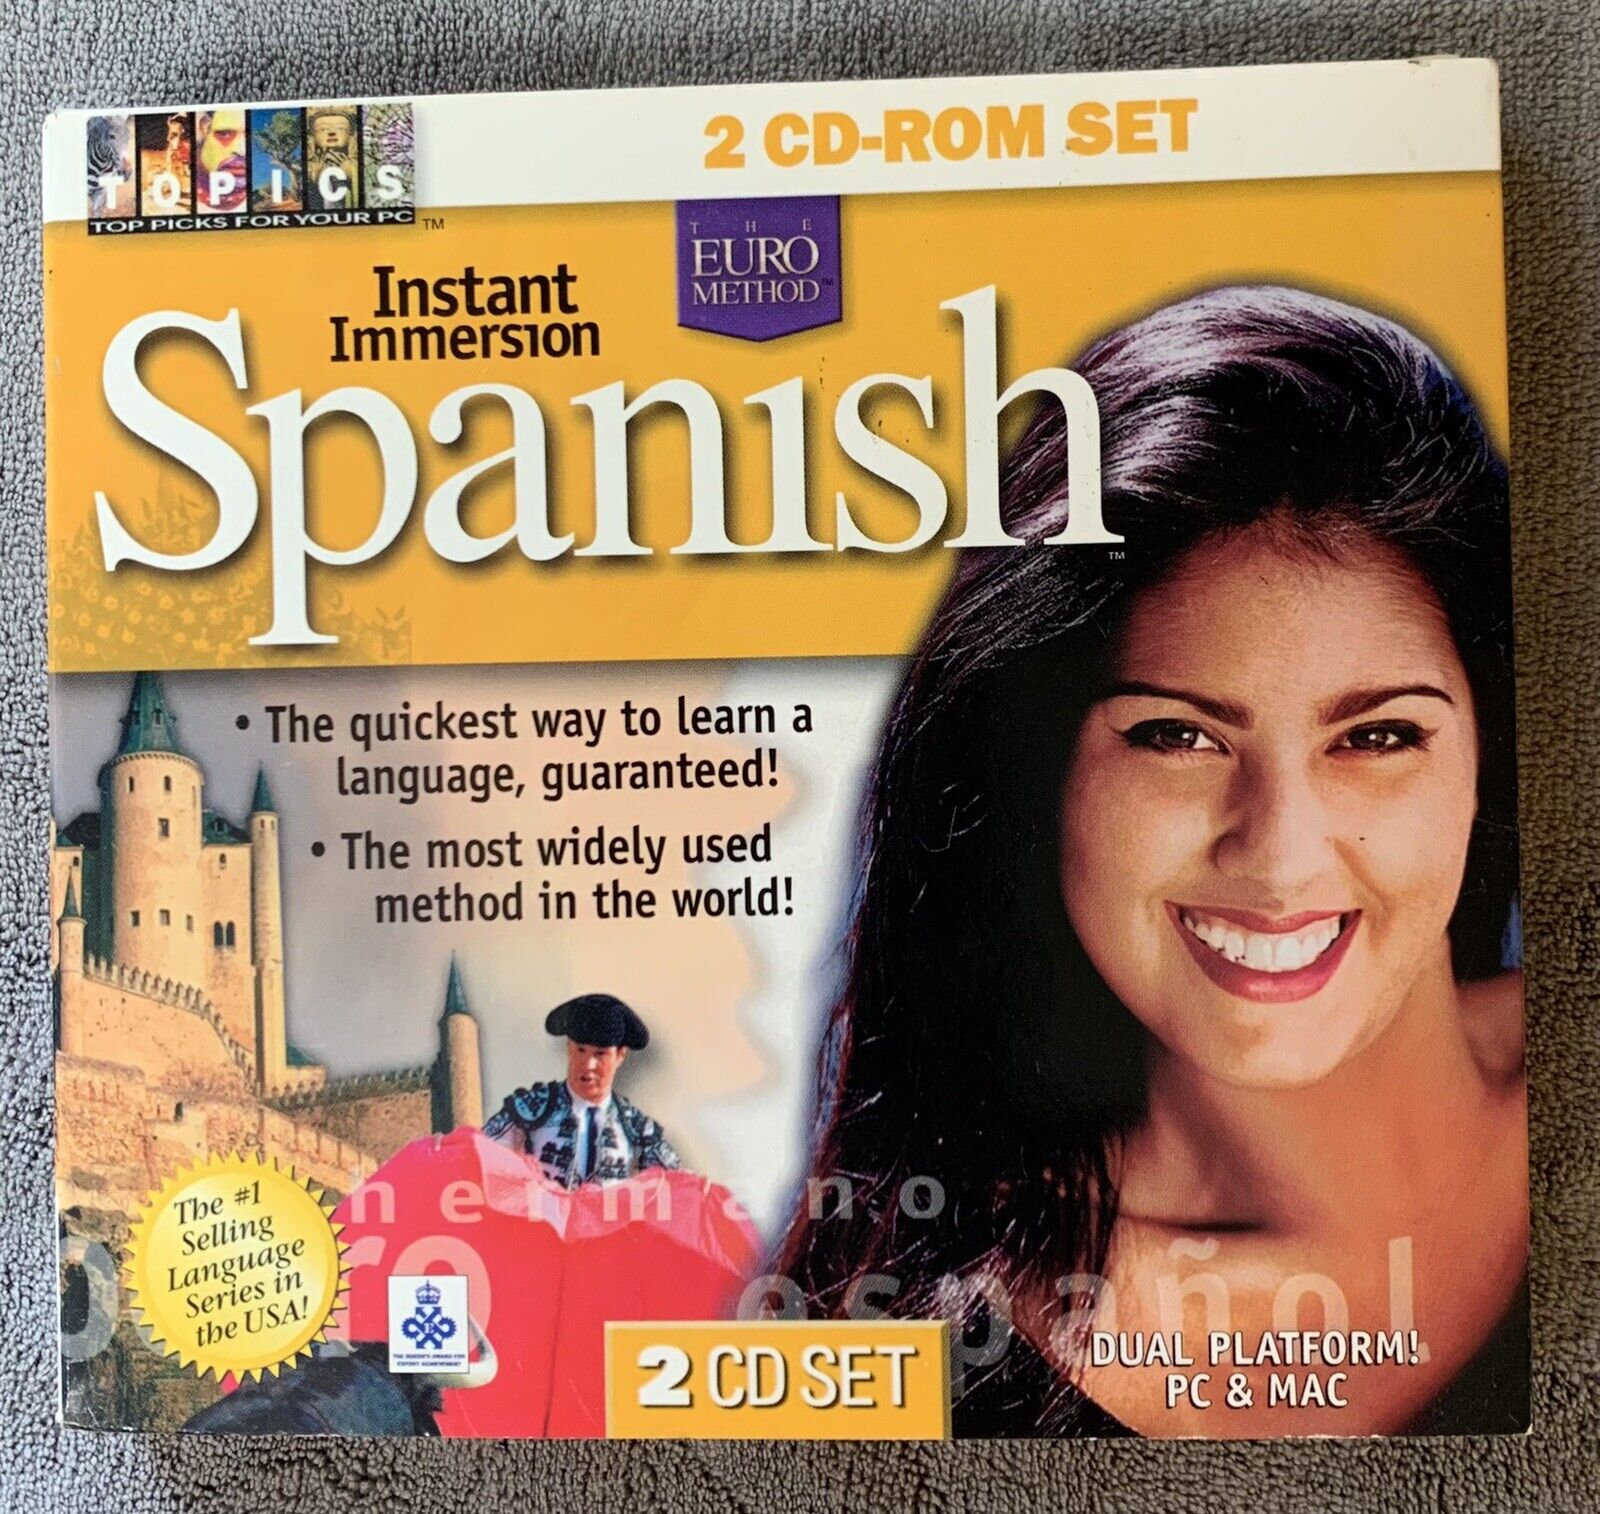 Instant Immersion Spanish, 2 CD Rom Set, PC & Mac - New, Original Seal Included